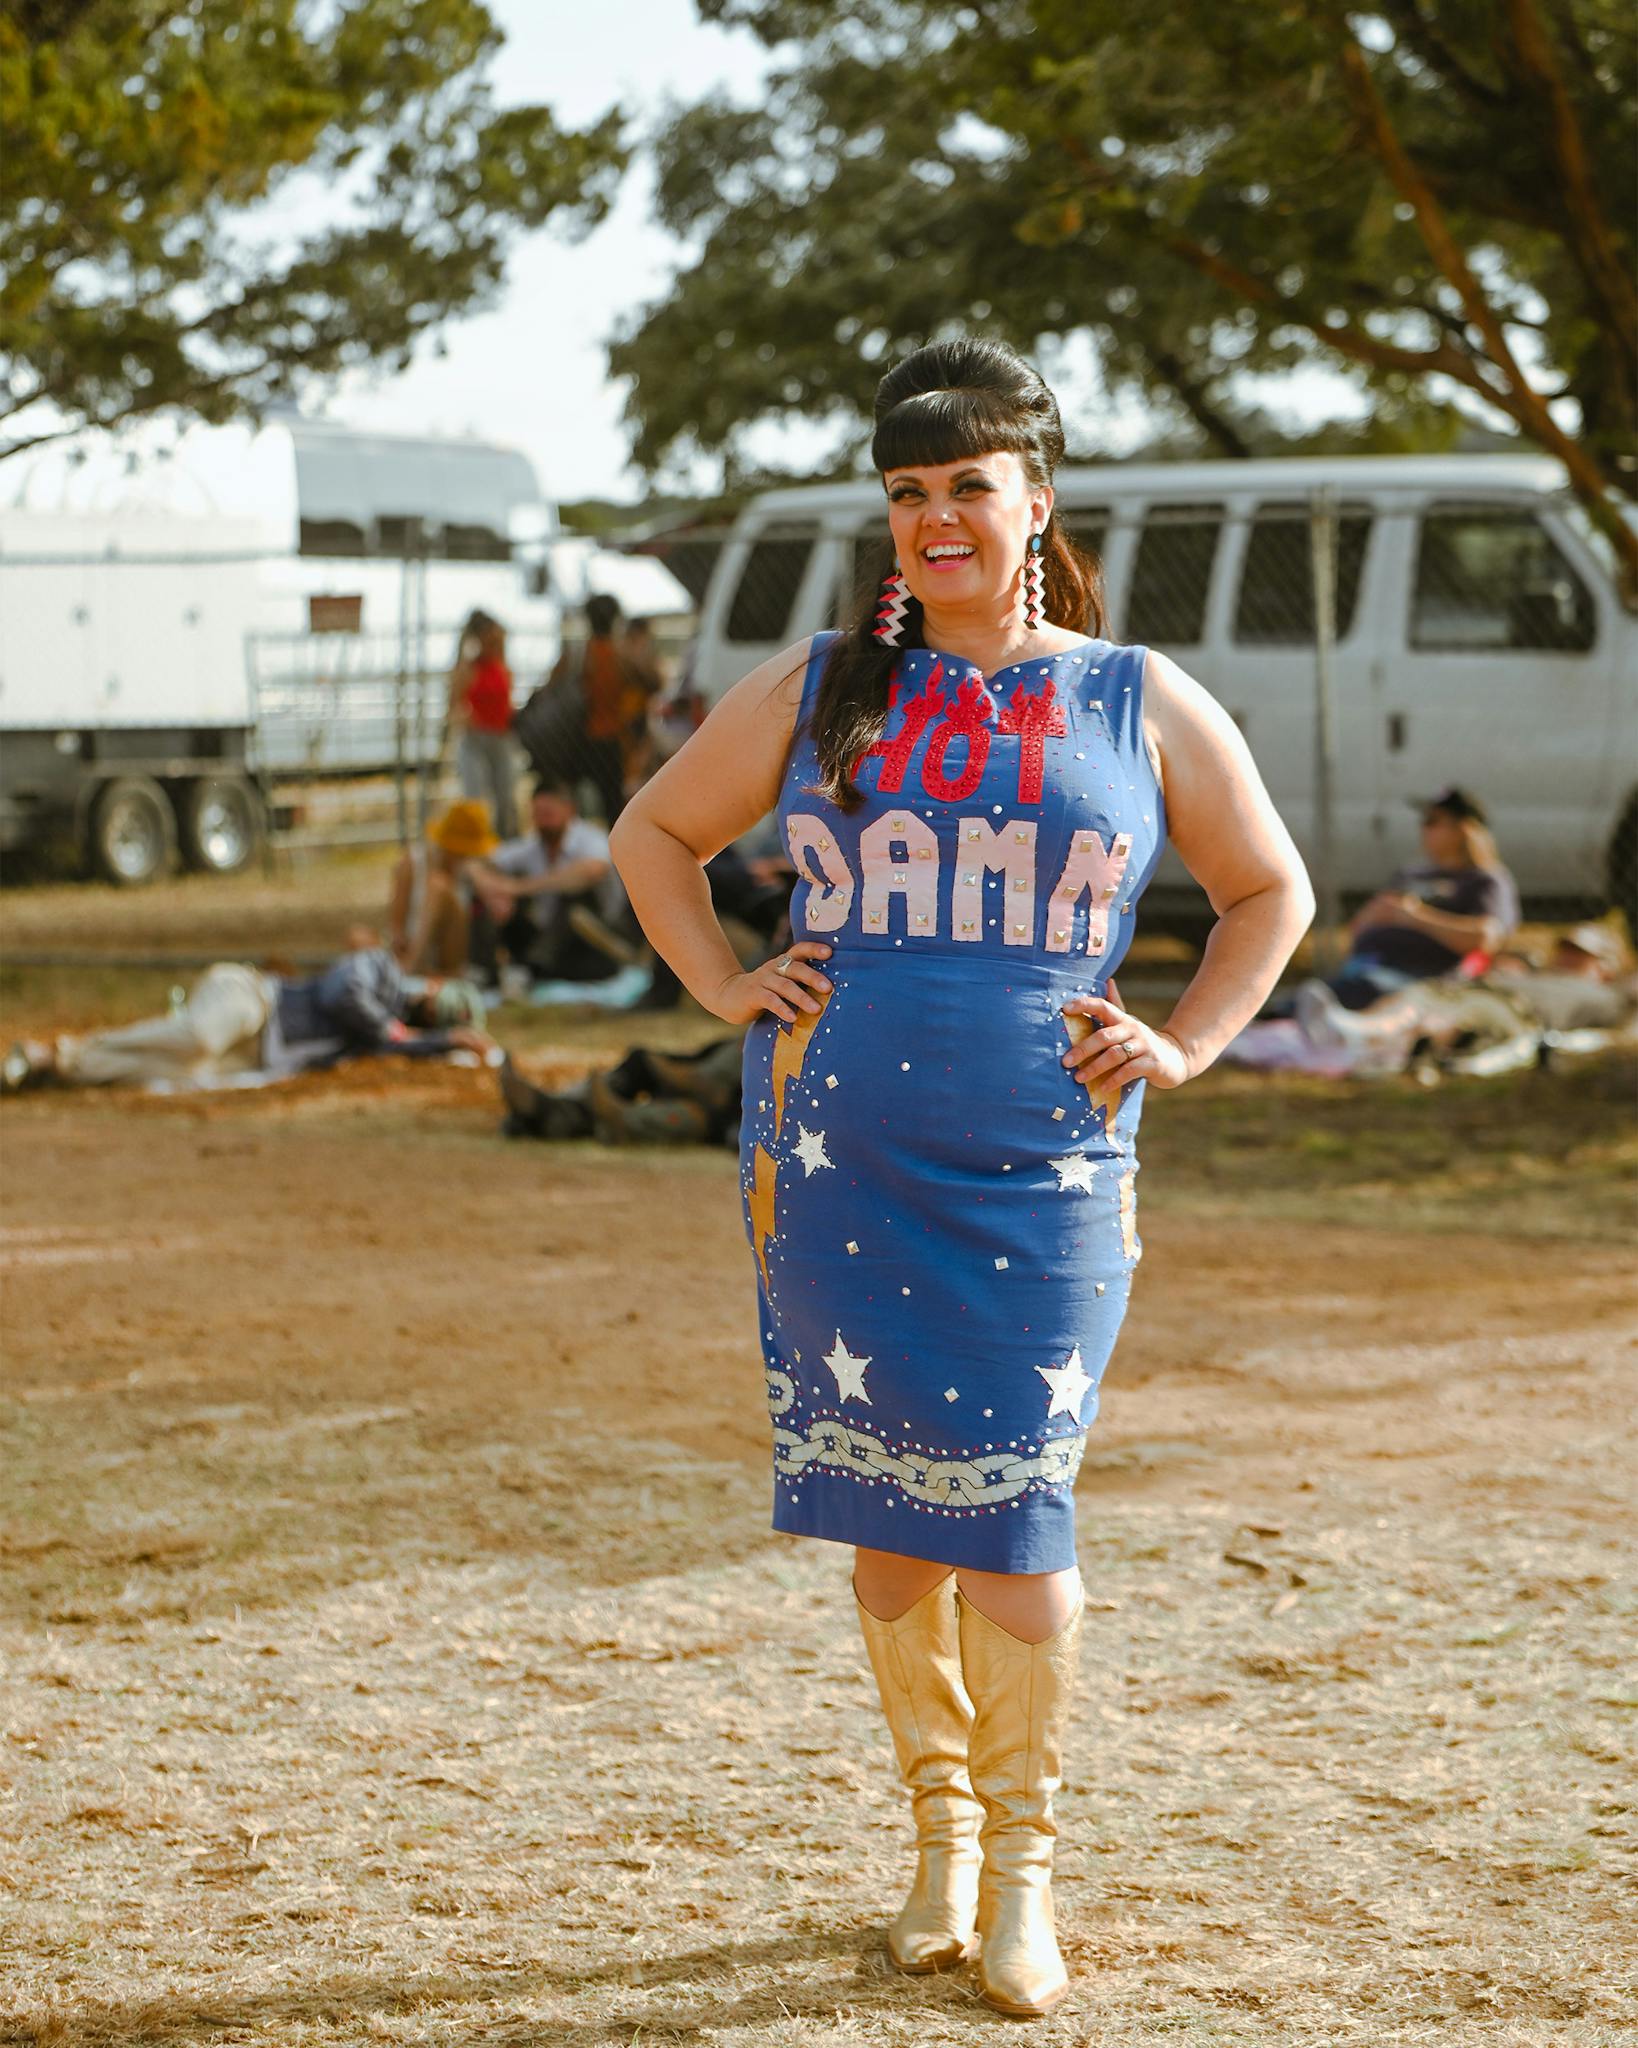 New Zealand country singer Tami Neilson walked the grounds in her "Hot Damn" outfit after her performance.